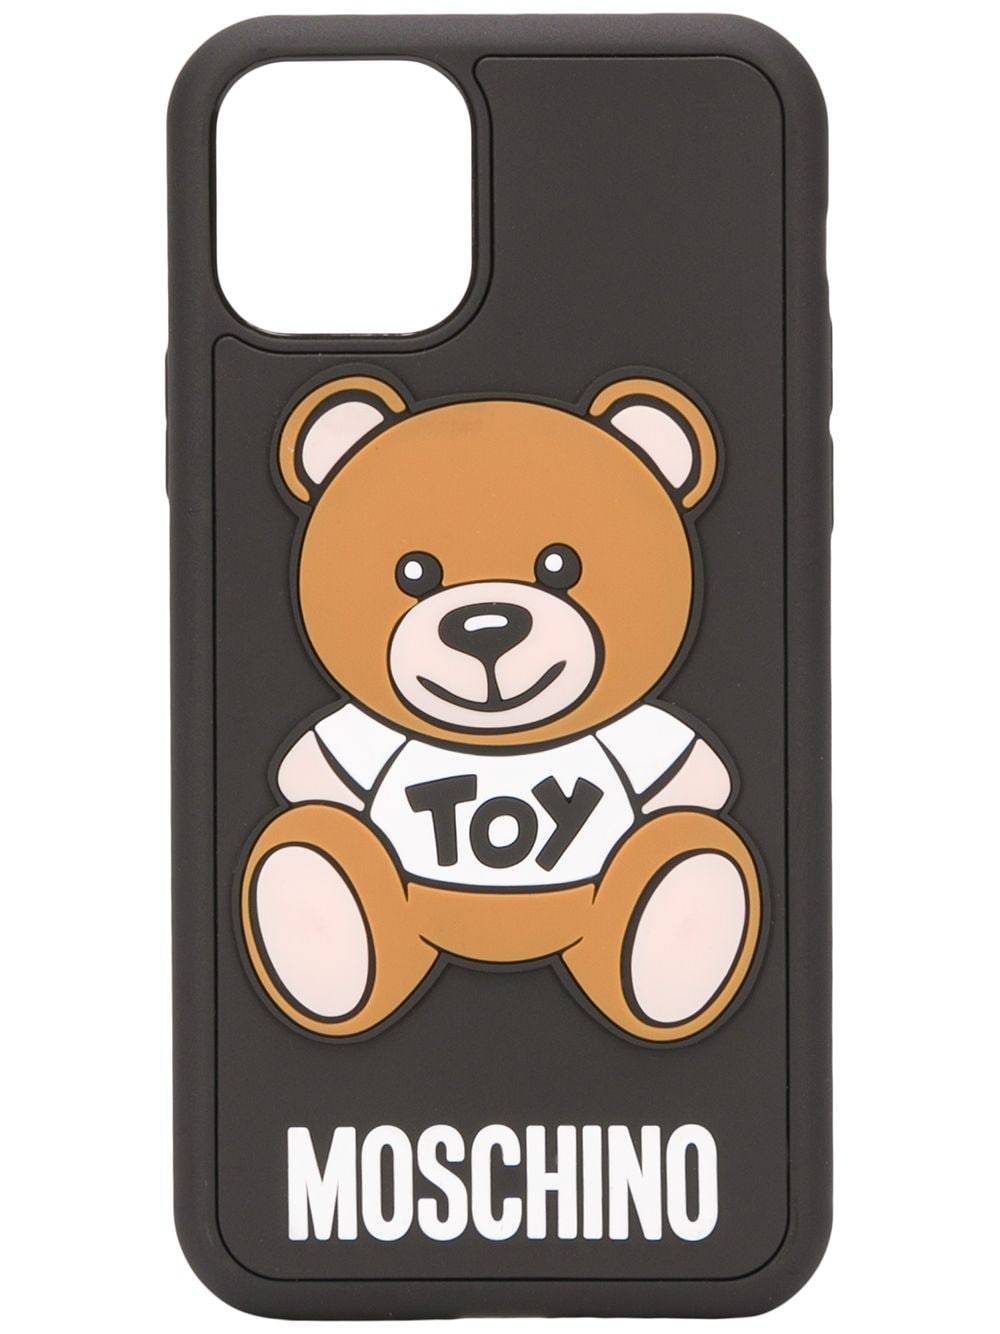 Moschino Black Teddy Bear Iphone 11 Pro Max Case In 1555